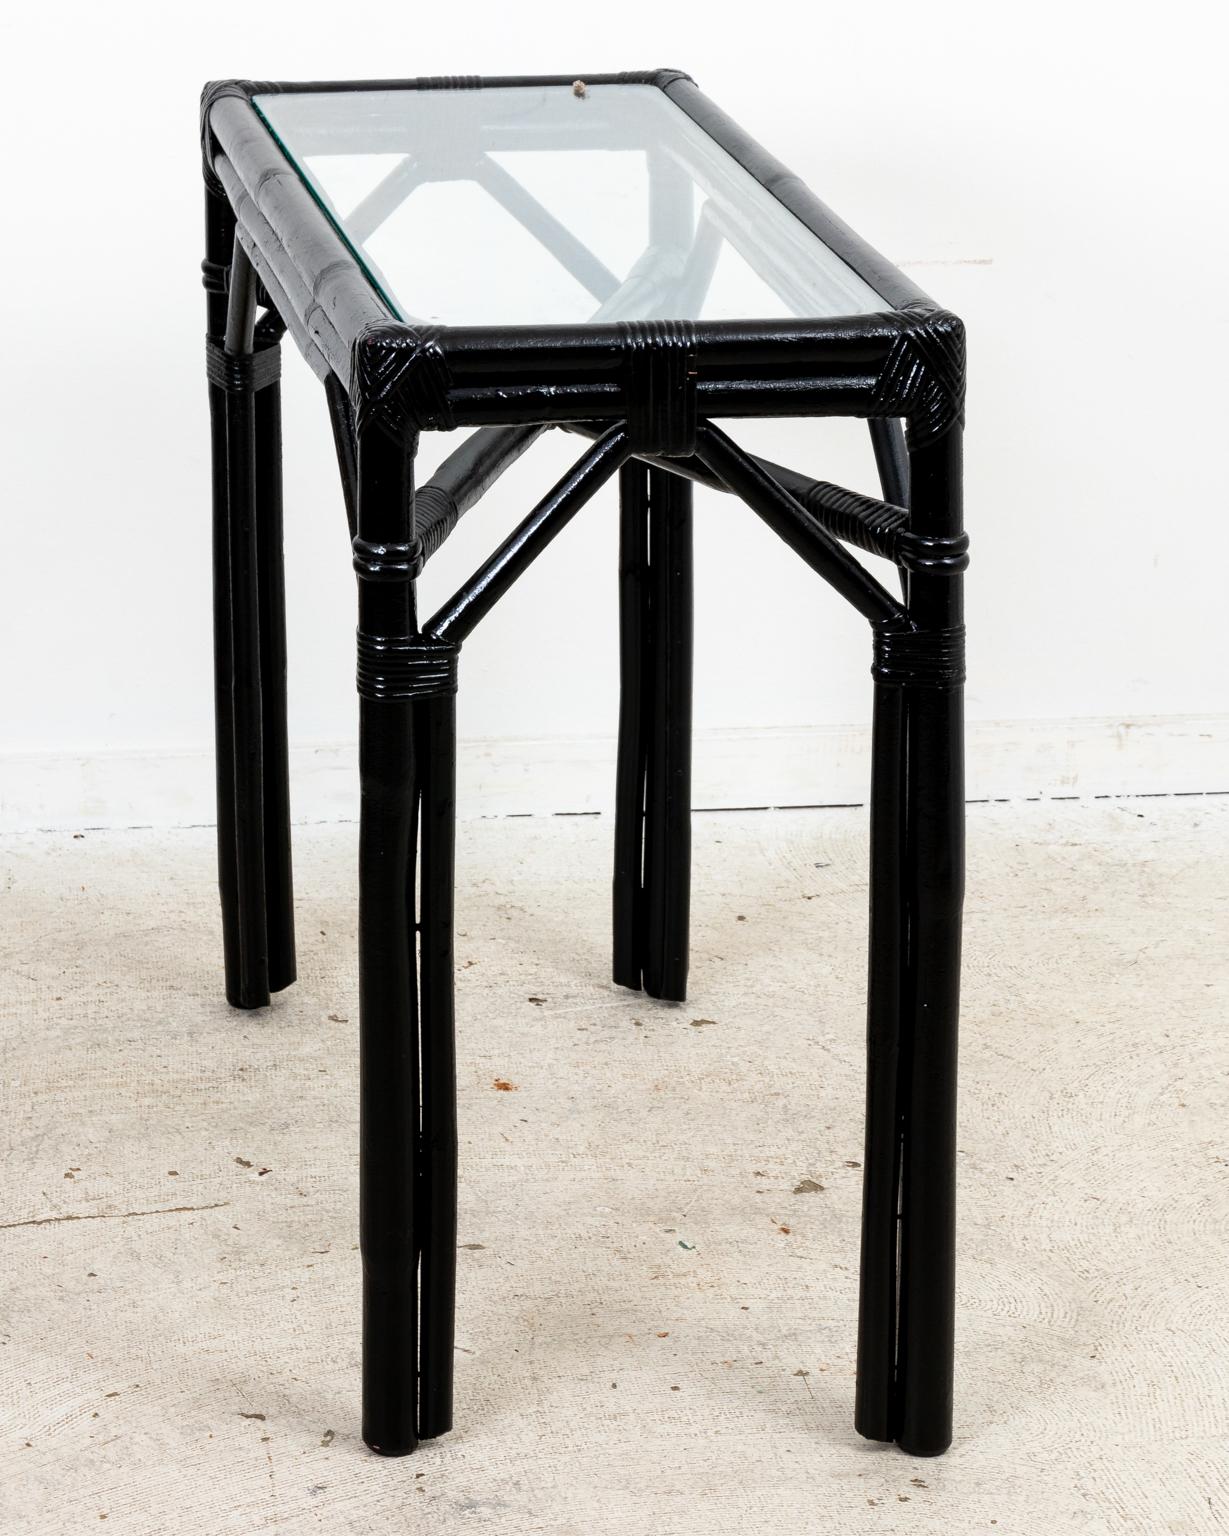 Circa late 20th century Hollywood Regency style bamboo console table in a black painted finish with new glass top. Please note of wear consistent with age. Good overall condition.